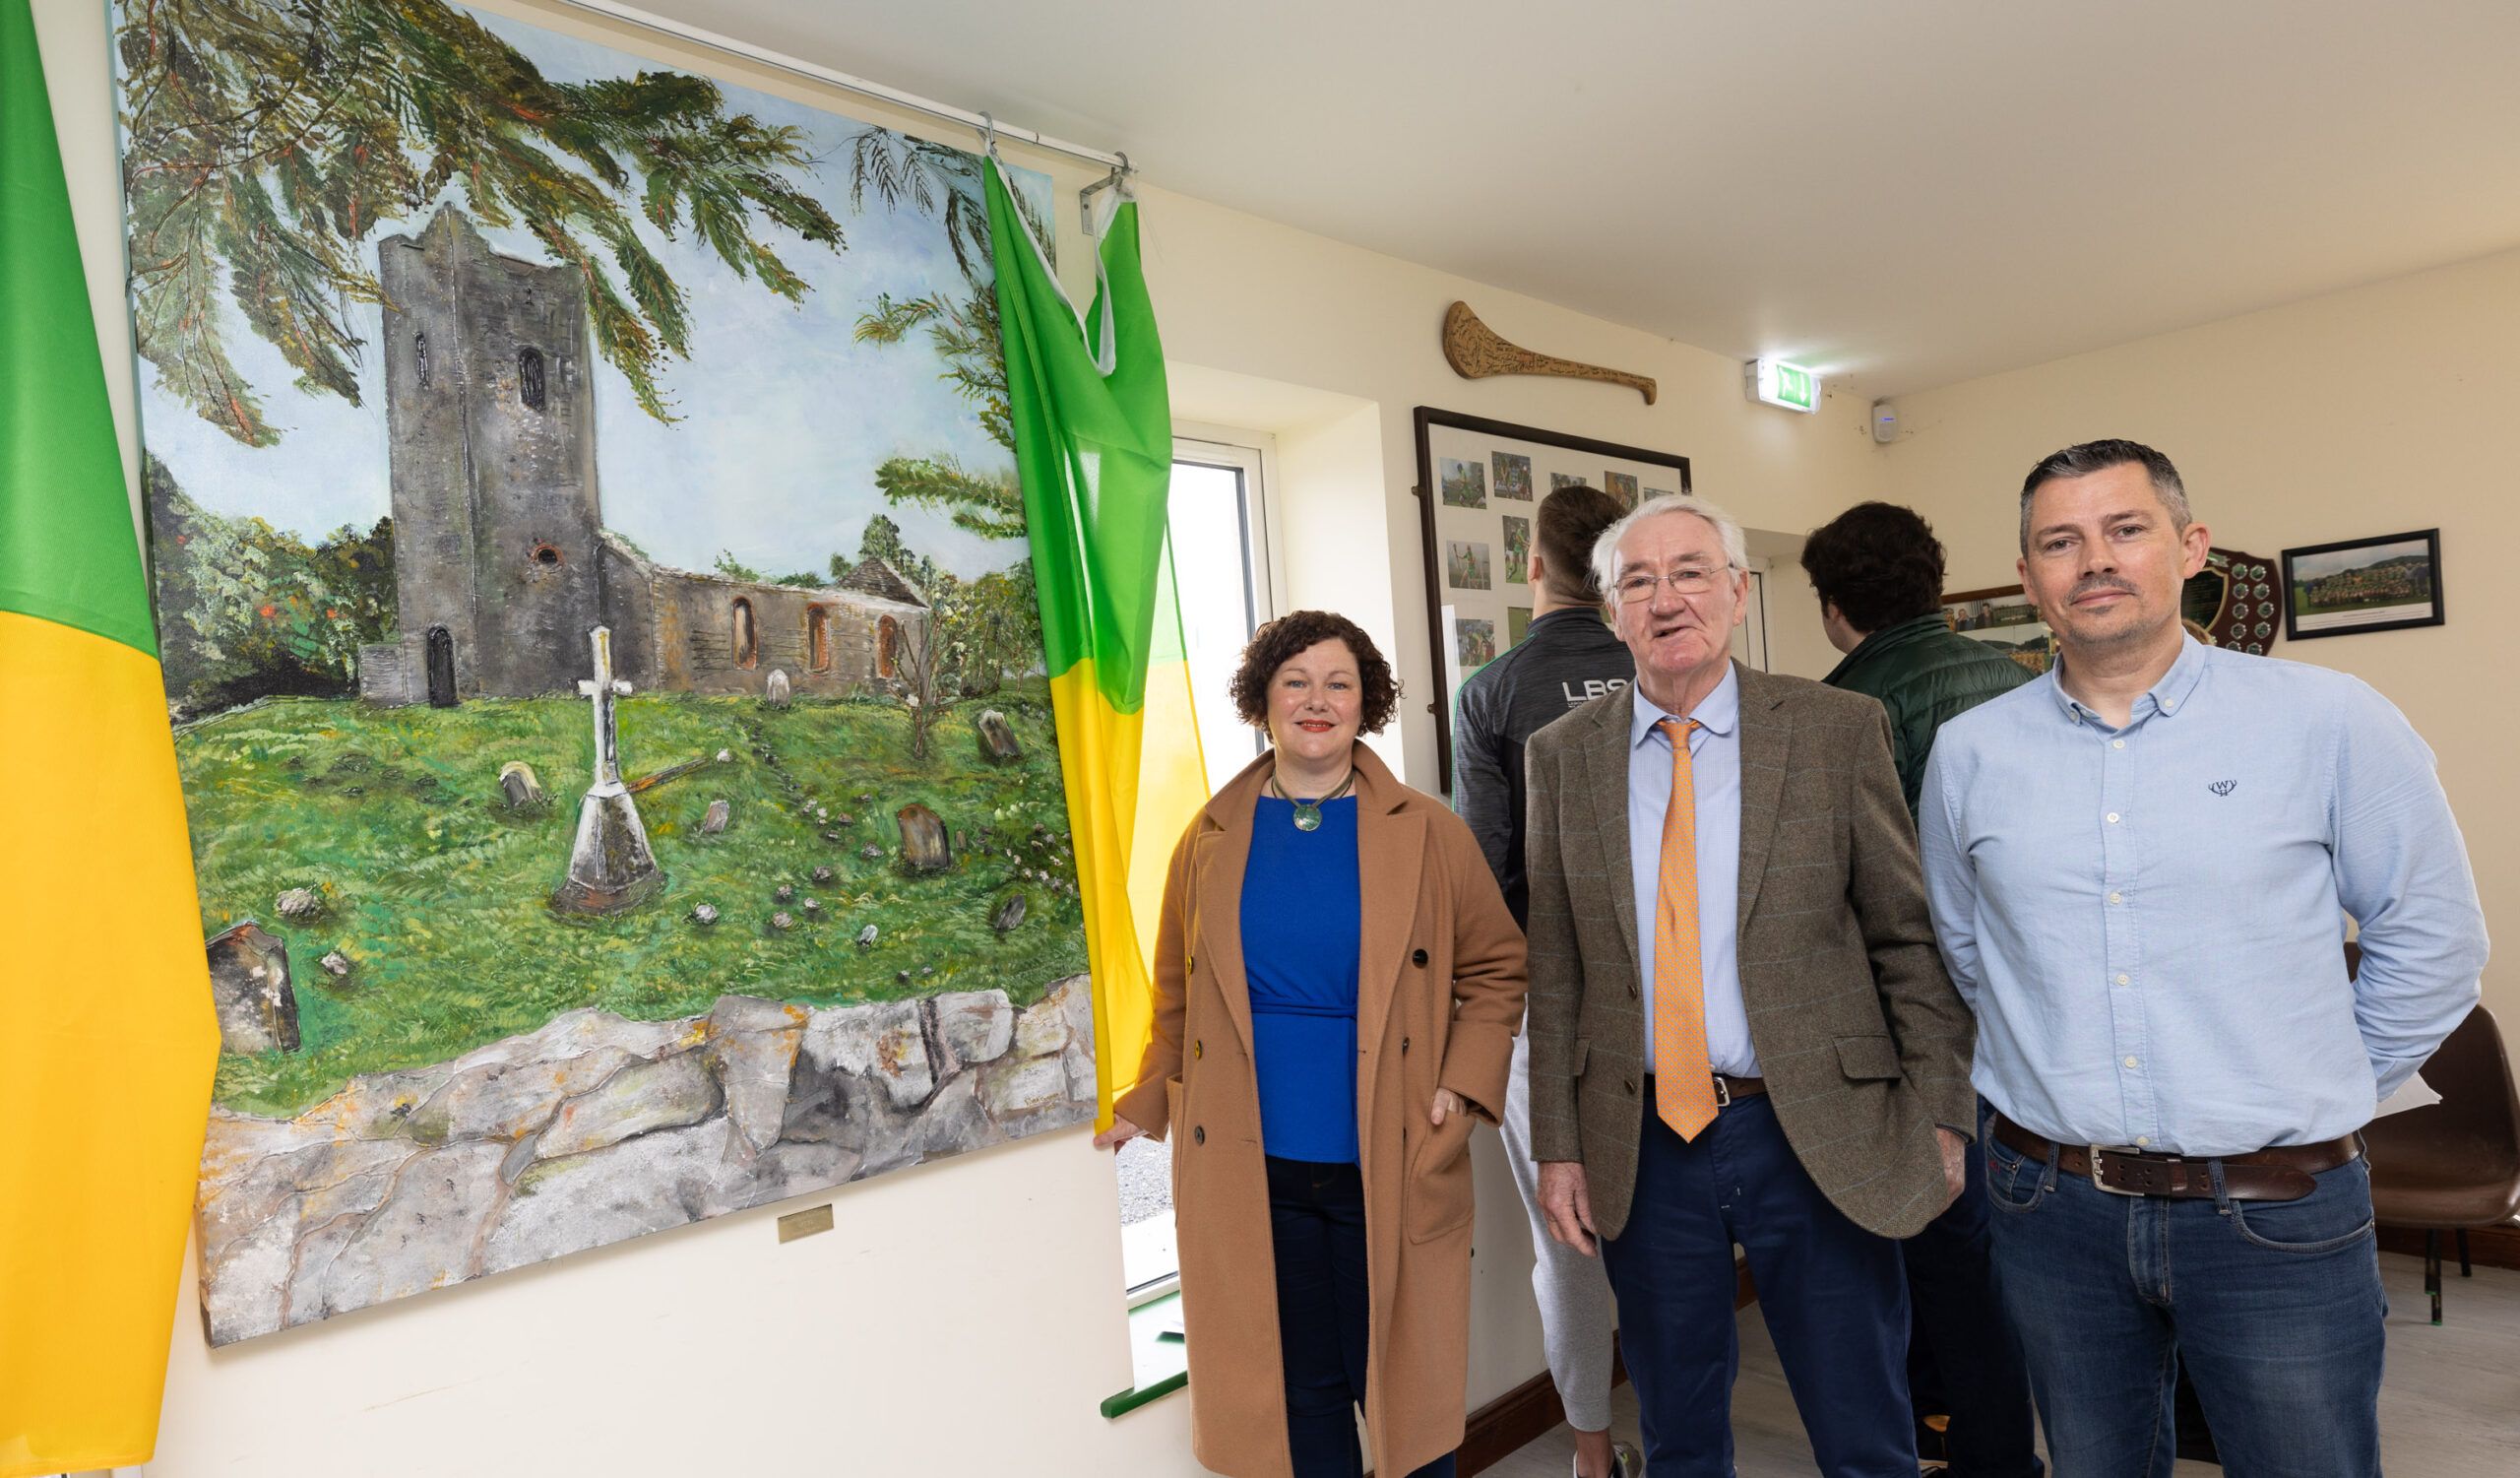 Artist Aileen Donovan, James Deegan, chairman of the conservation committee and David Broderick, creative communities engagement officer Laois County Council at the unveiling of a painting of the Dysart Enos old Church by artist Aileen Donovan at Park Ratheniska GAA Club. This project was funded by Creative Laois/Creative Ireland as part of their Heritage through Art grant scheme. Picture: Alf Harvey.